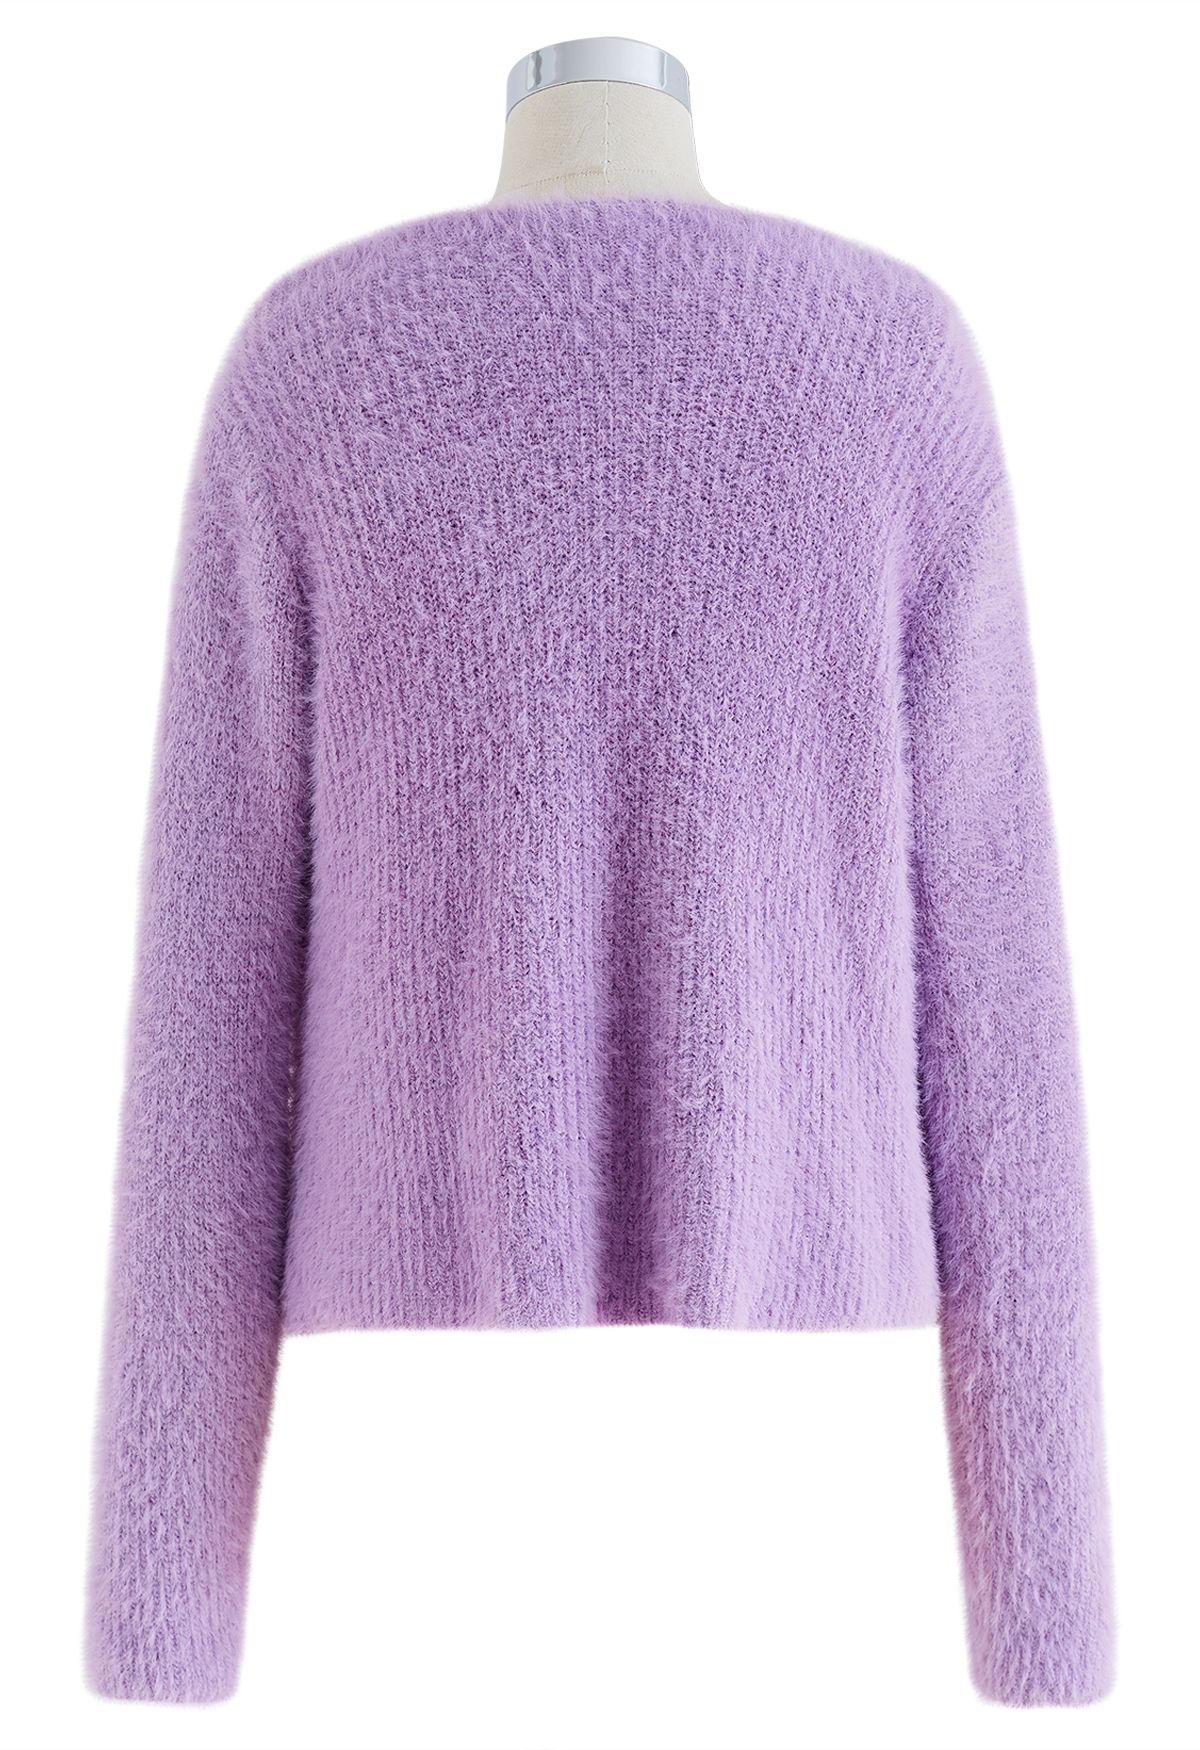 One-Shoulder Fuzzy Knit Top and Cardigan Set in Lilac